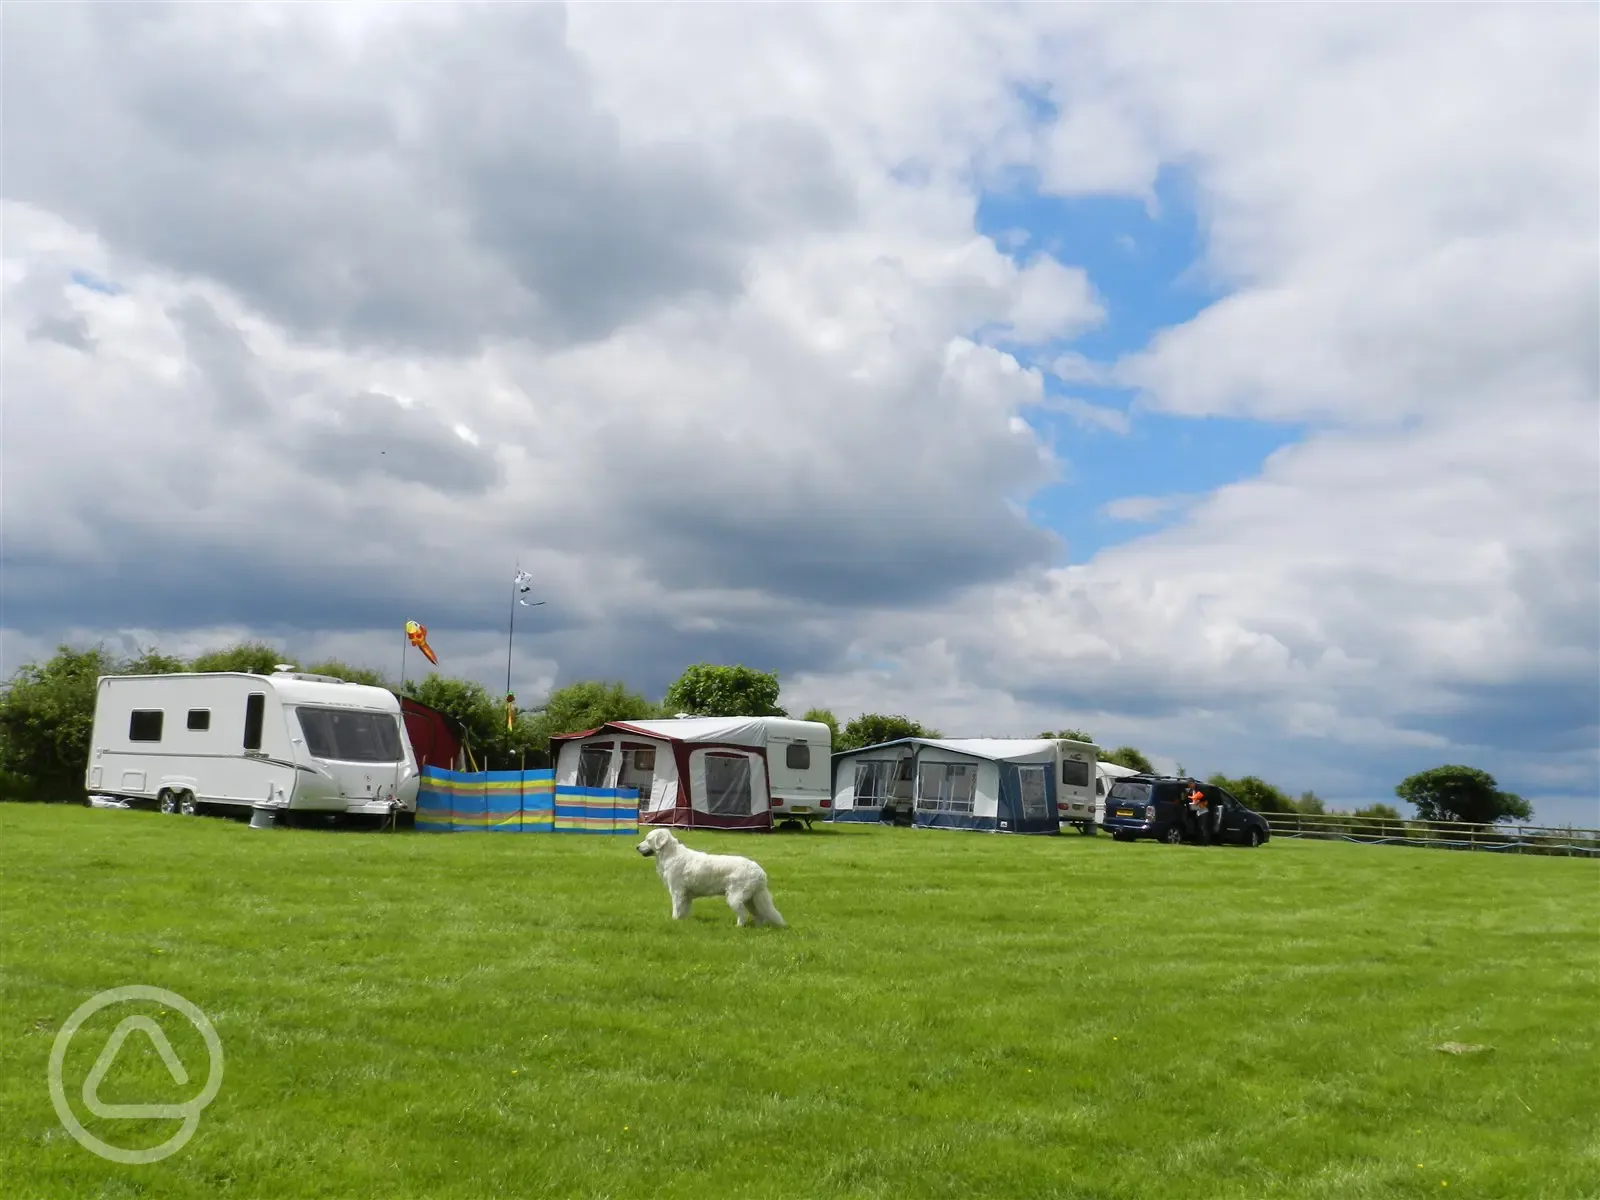 Our lovely flat grassy field with electric hookup